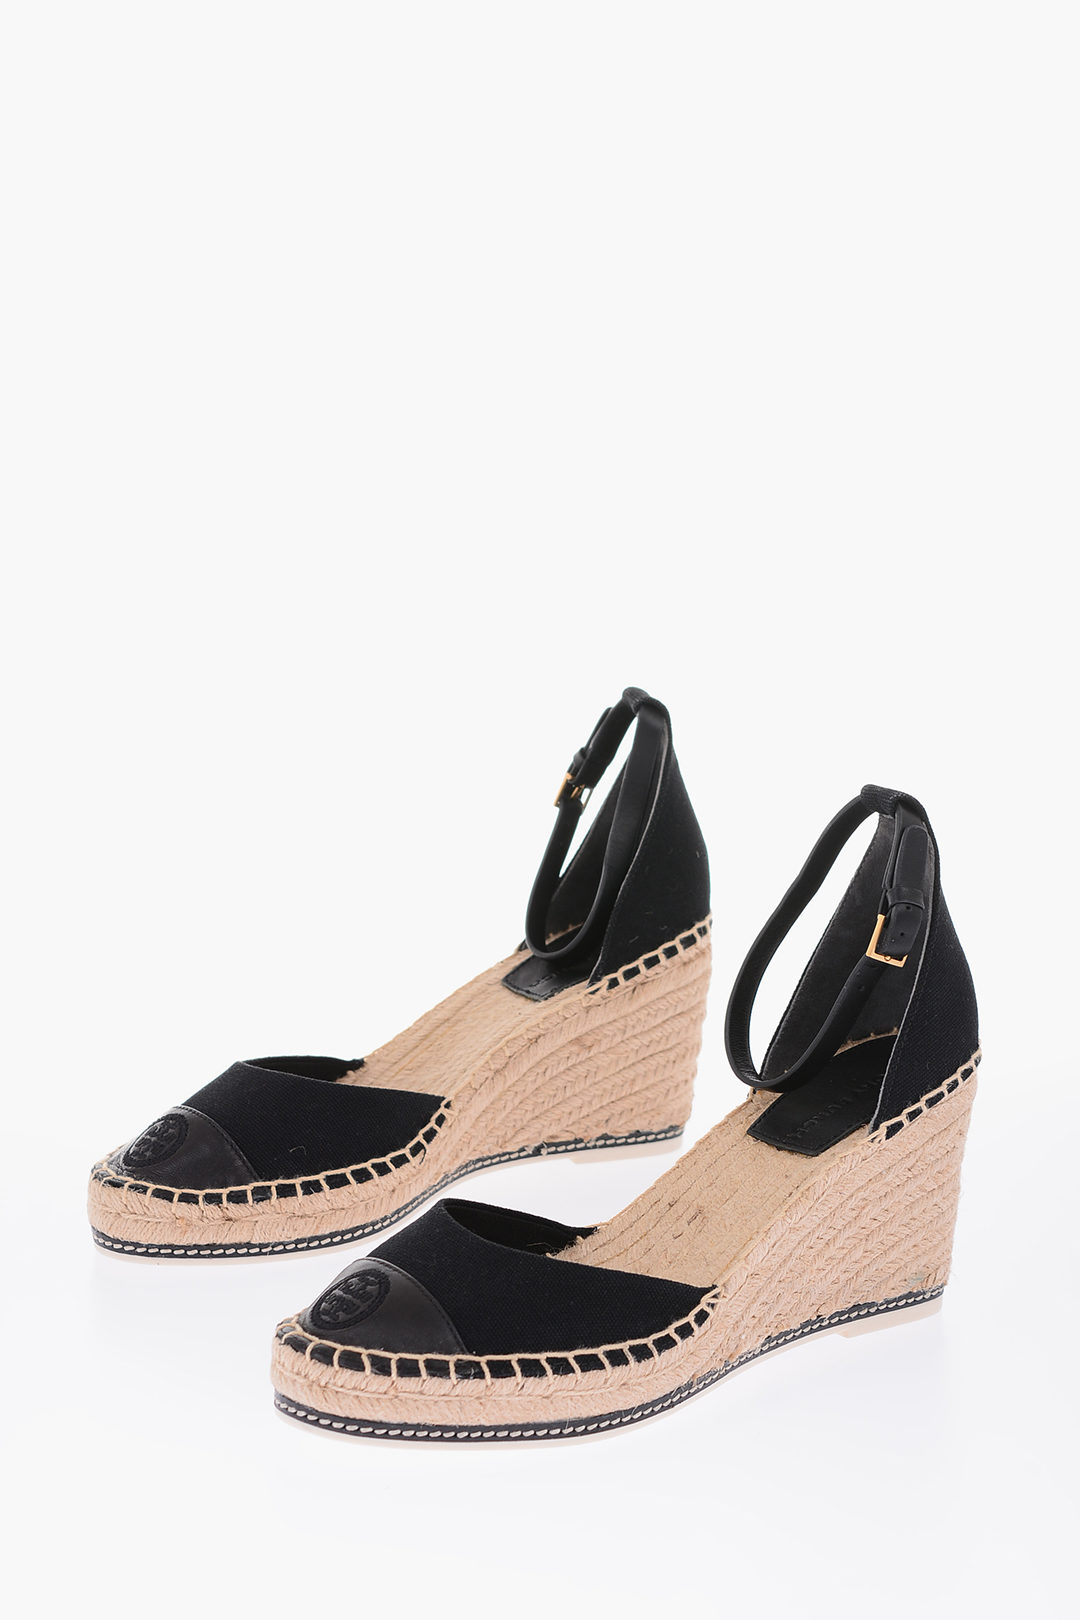 Tory Burch  leather and fabric Wedge espadrilles women - Glamood Outlet